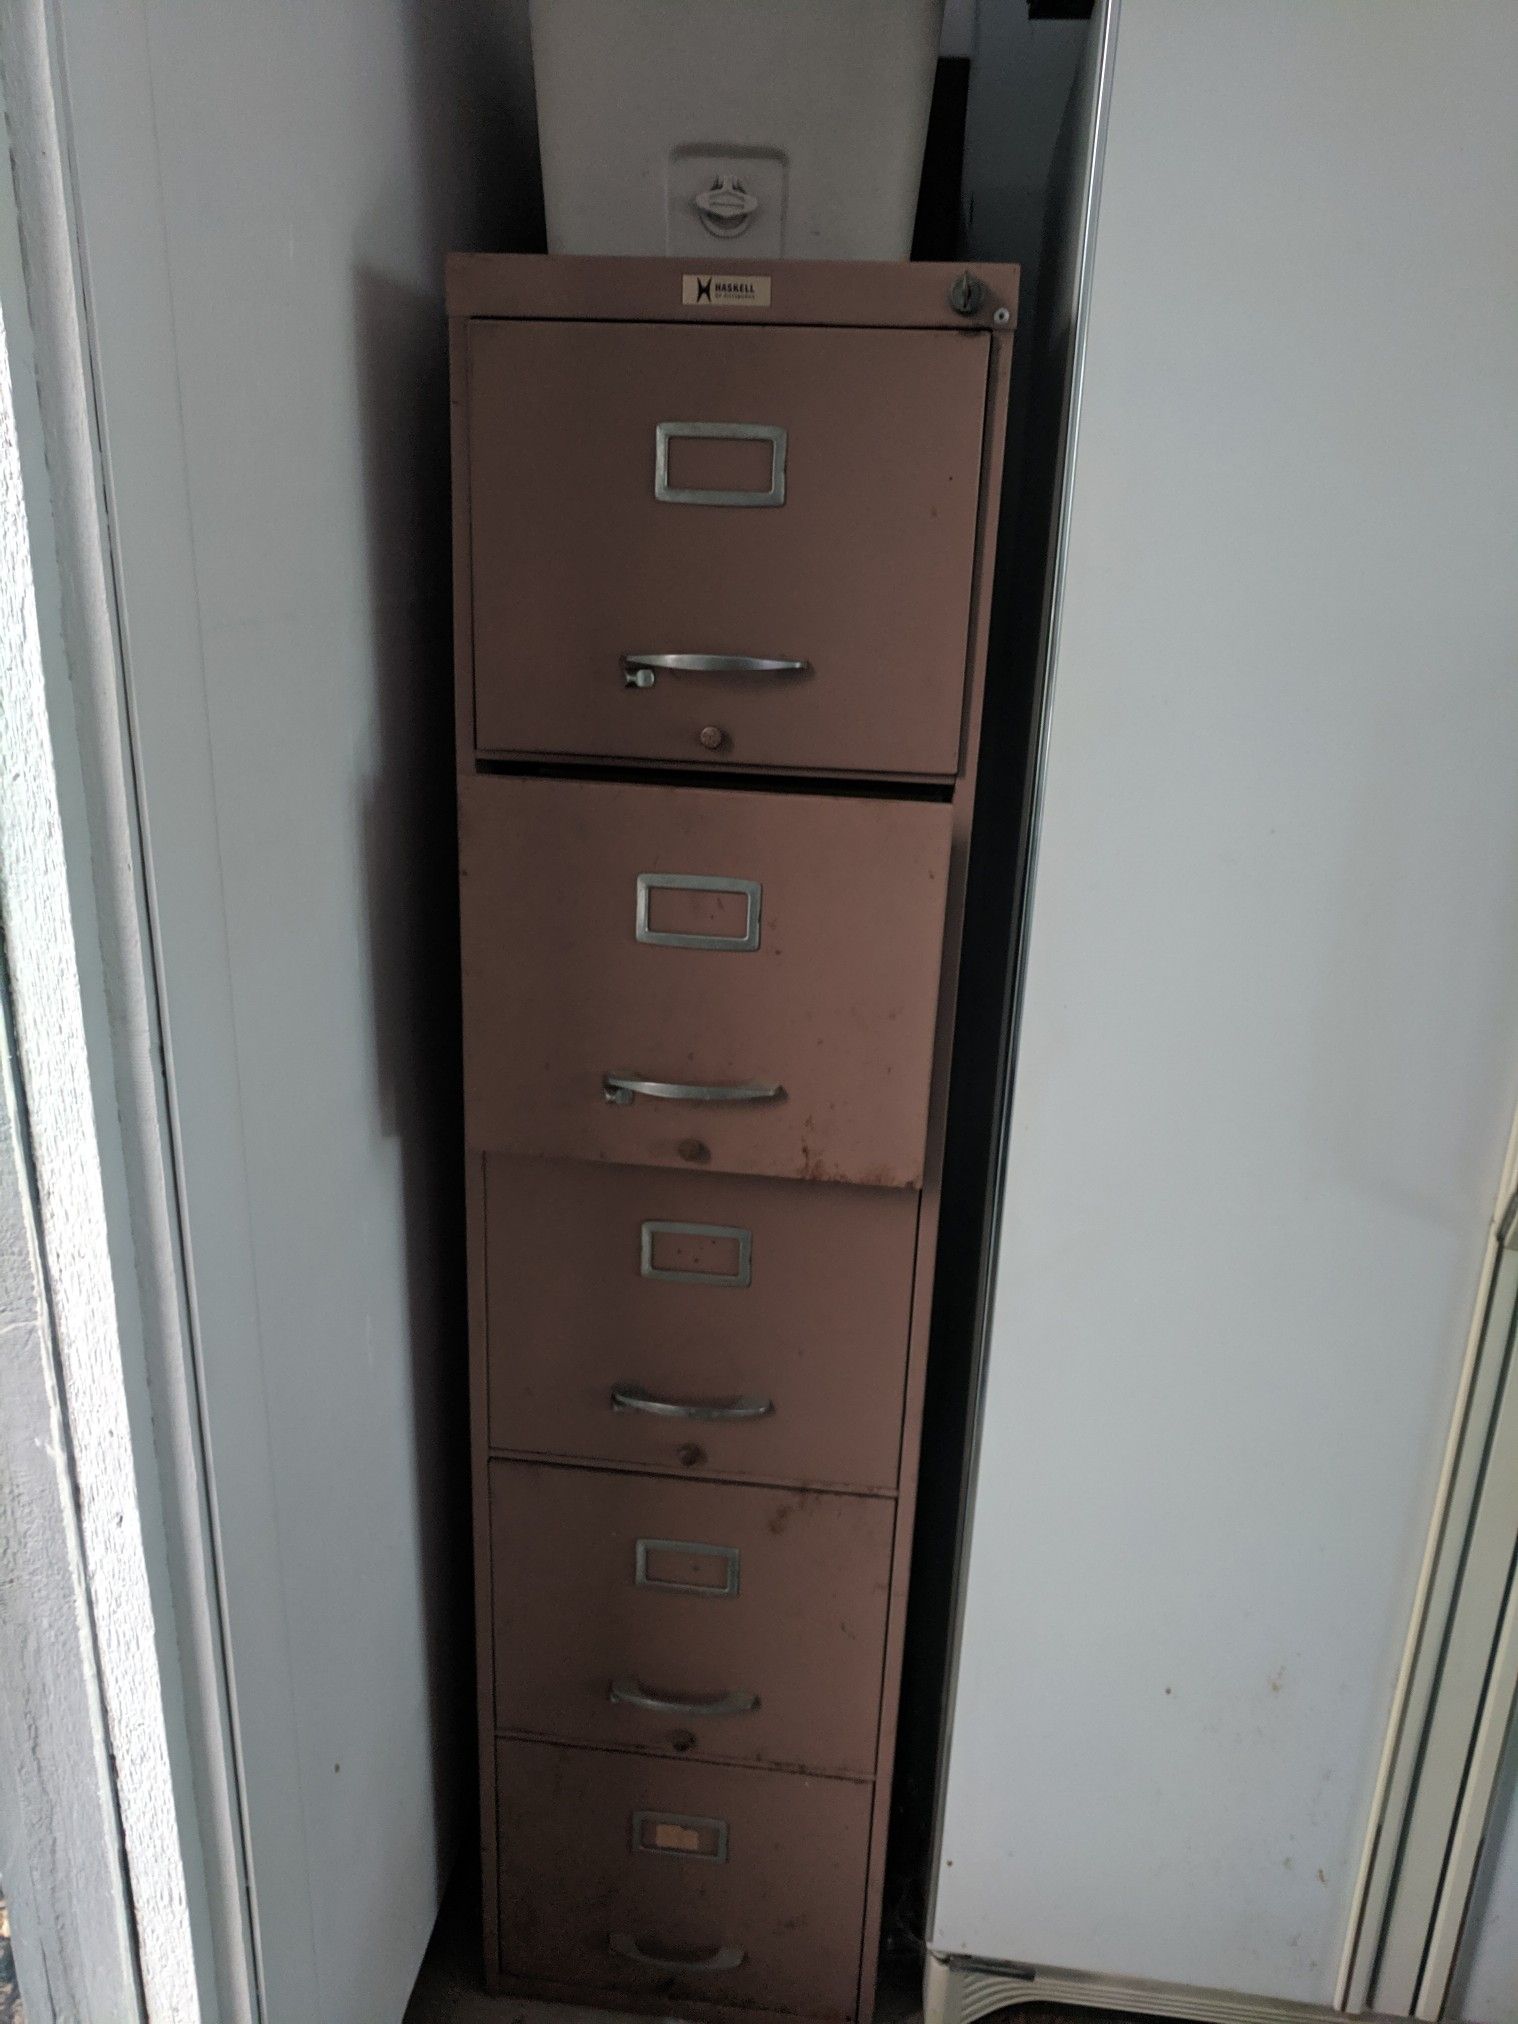 File cabinet with key